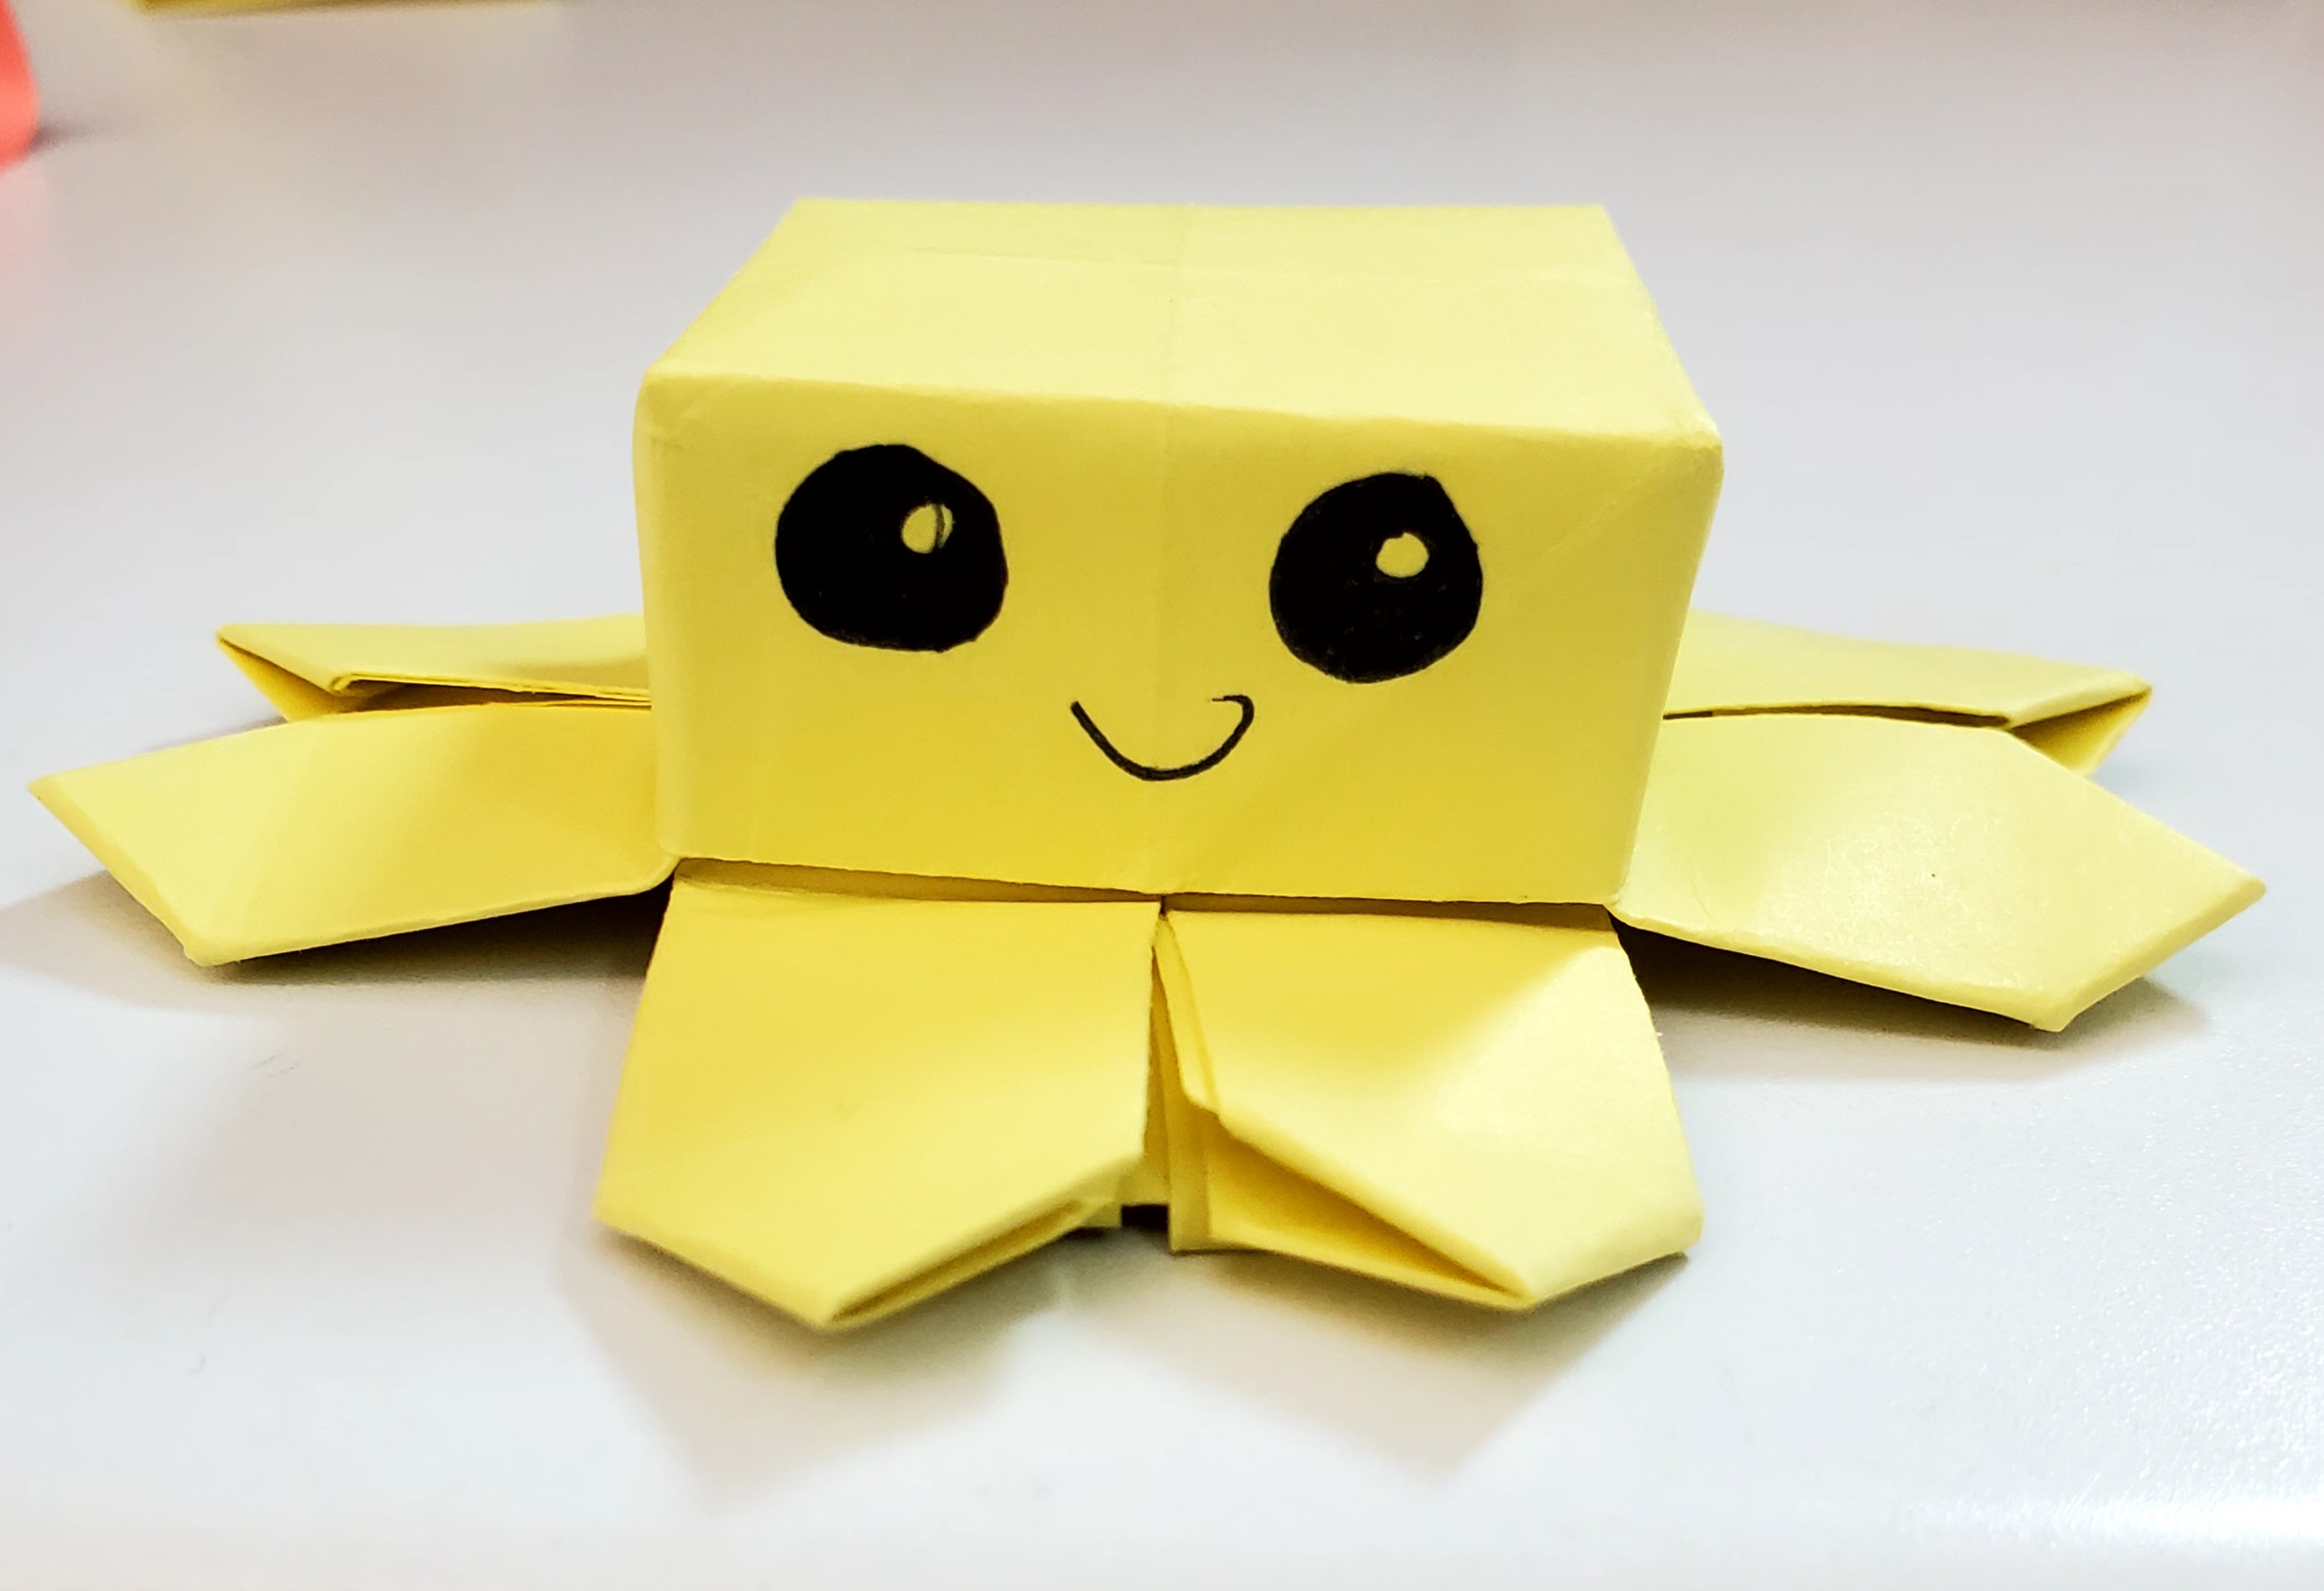 A yellow origami octopus fidget. The head is square shaped and the little critter has big eyes and a smile.